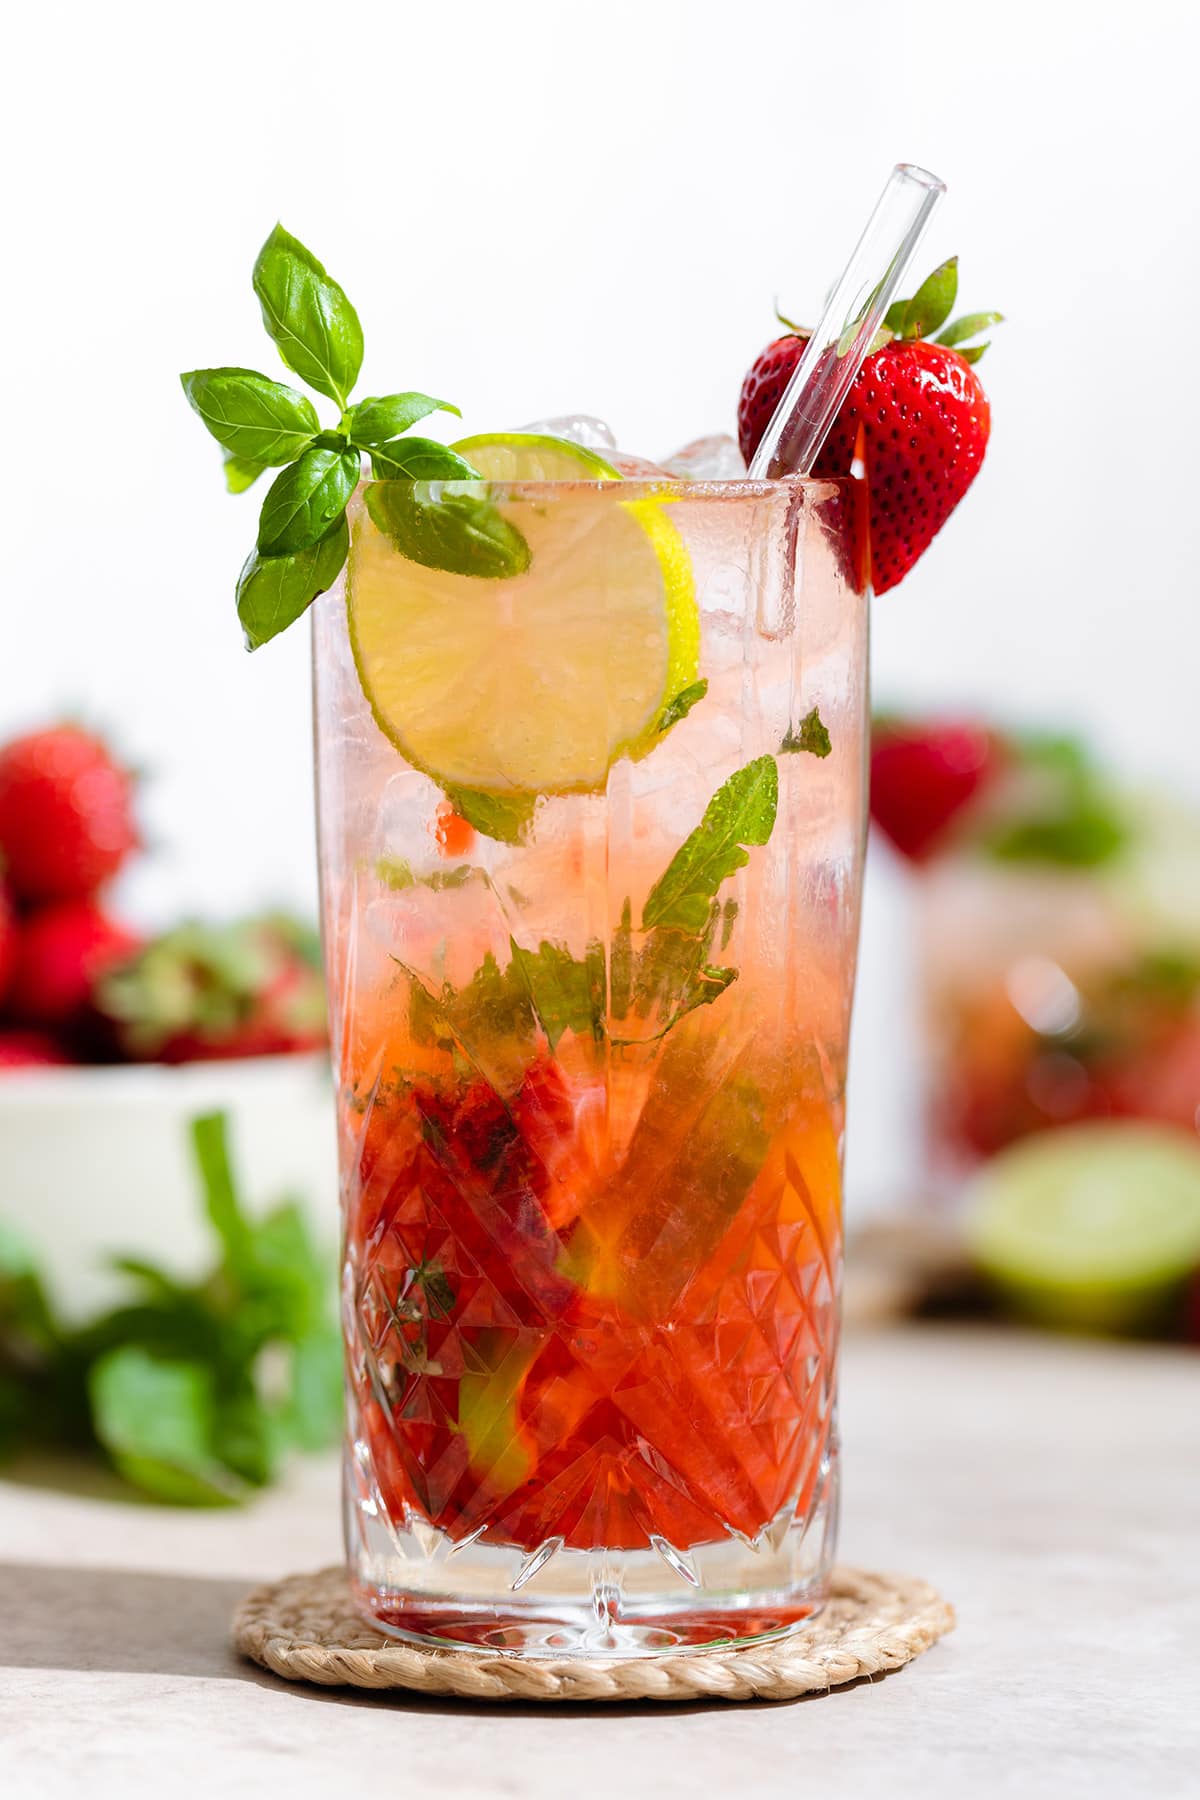 Strawberry basil mojito in a tall glass garnished with fresh basil, lime slice, and a strawberry.